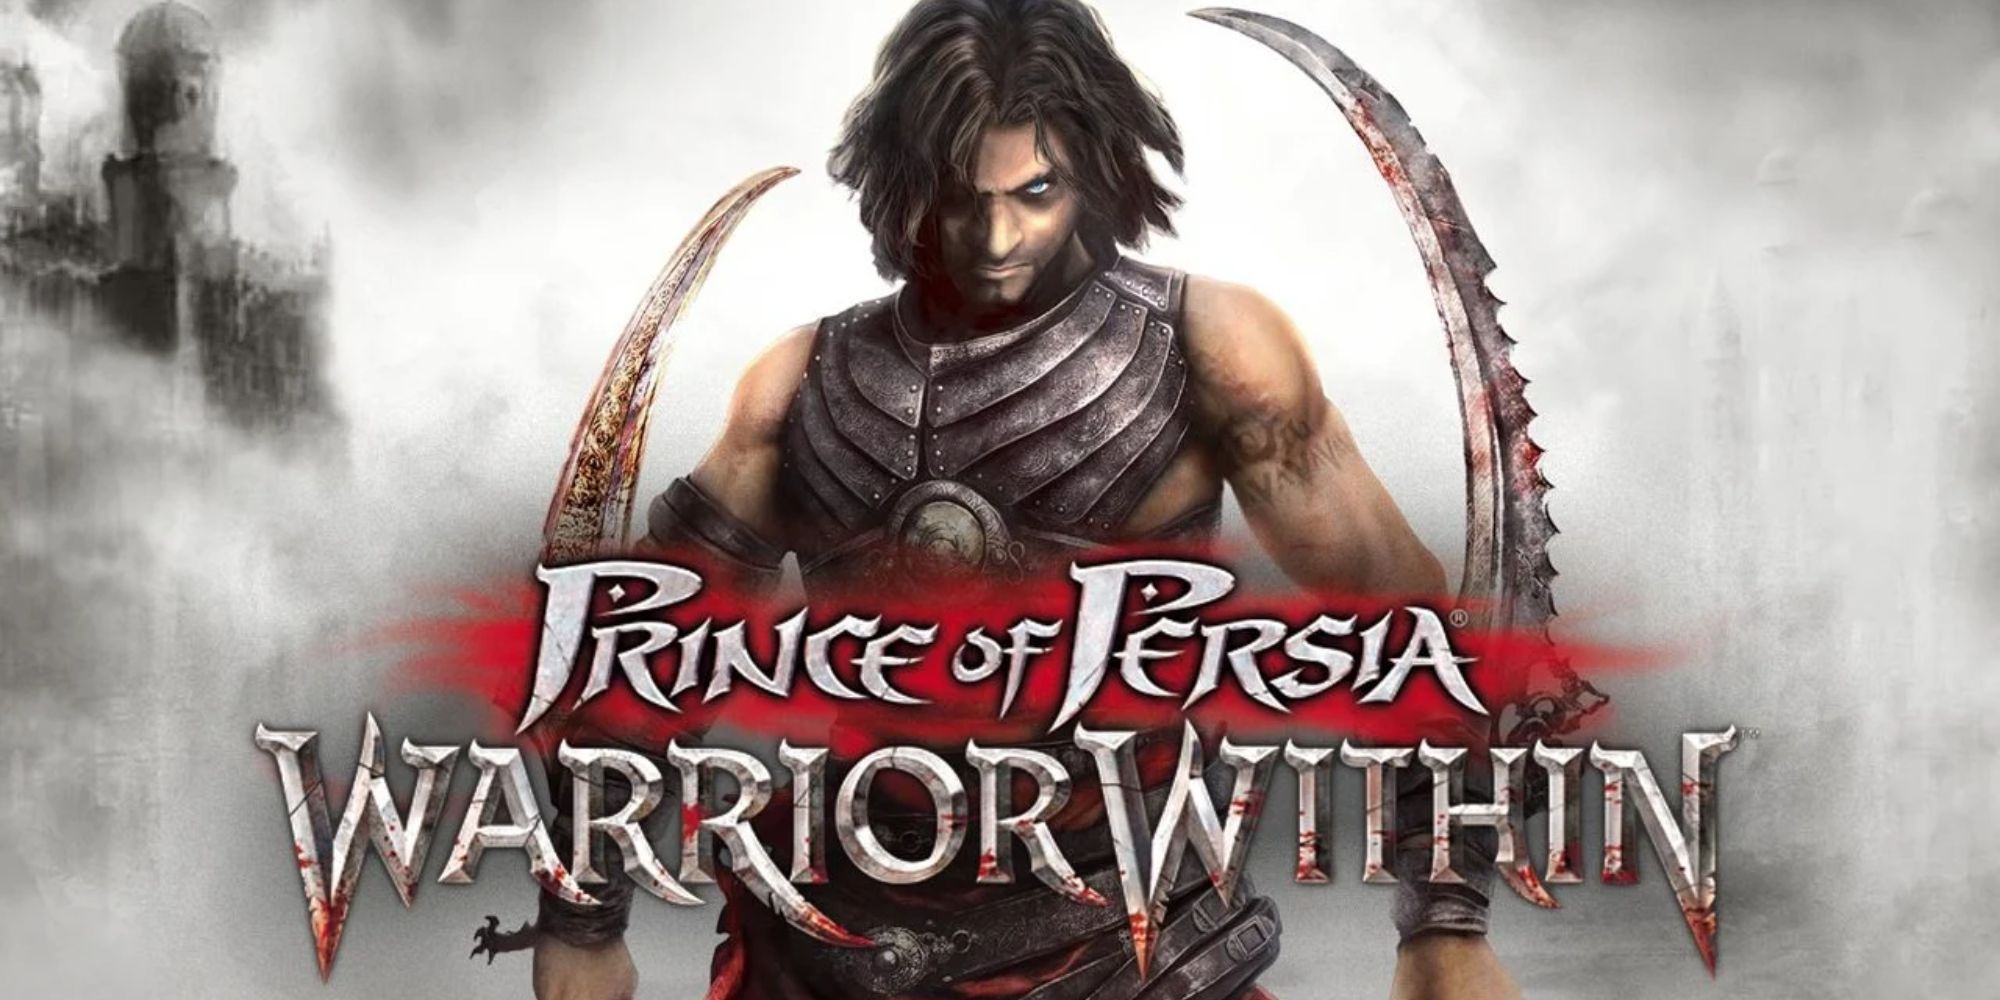 Prince of Persia Warrior Within game art